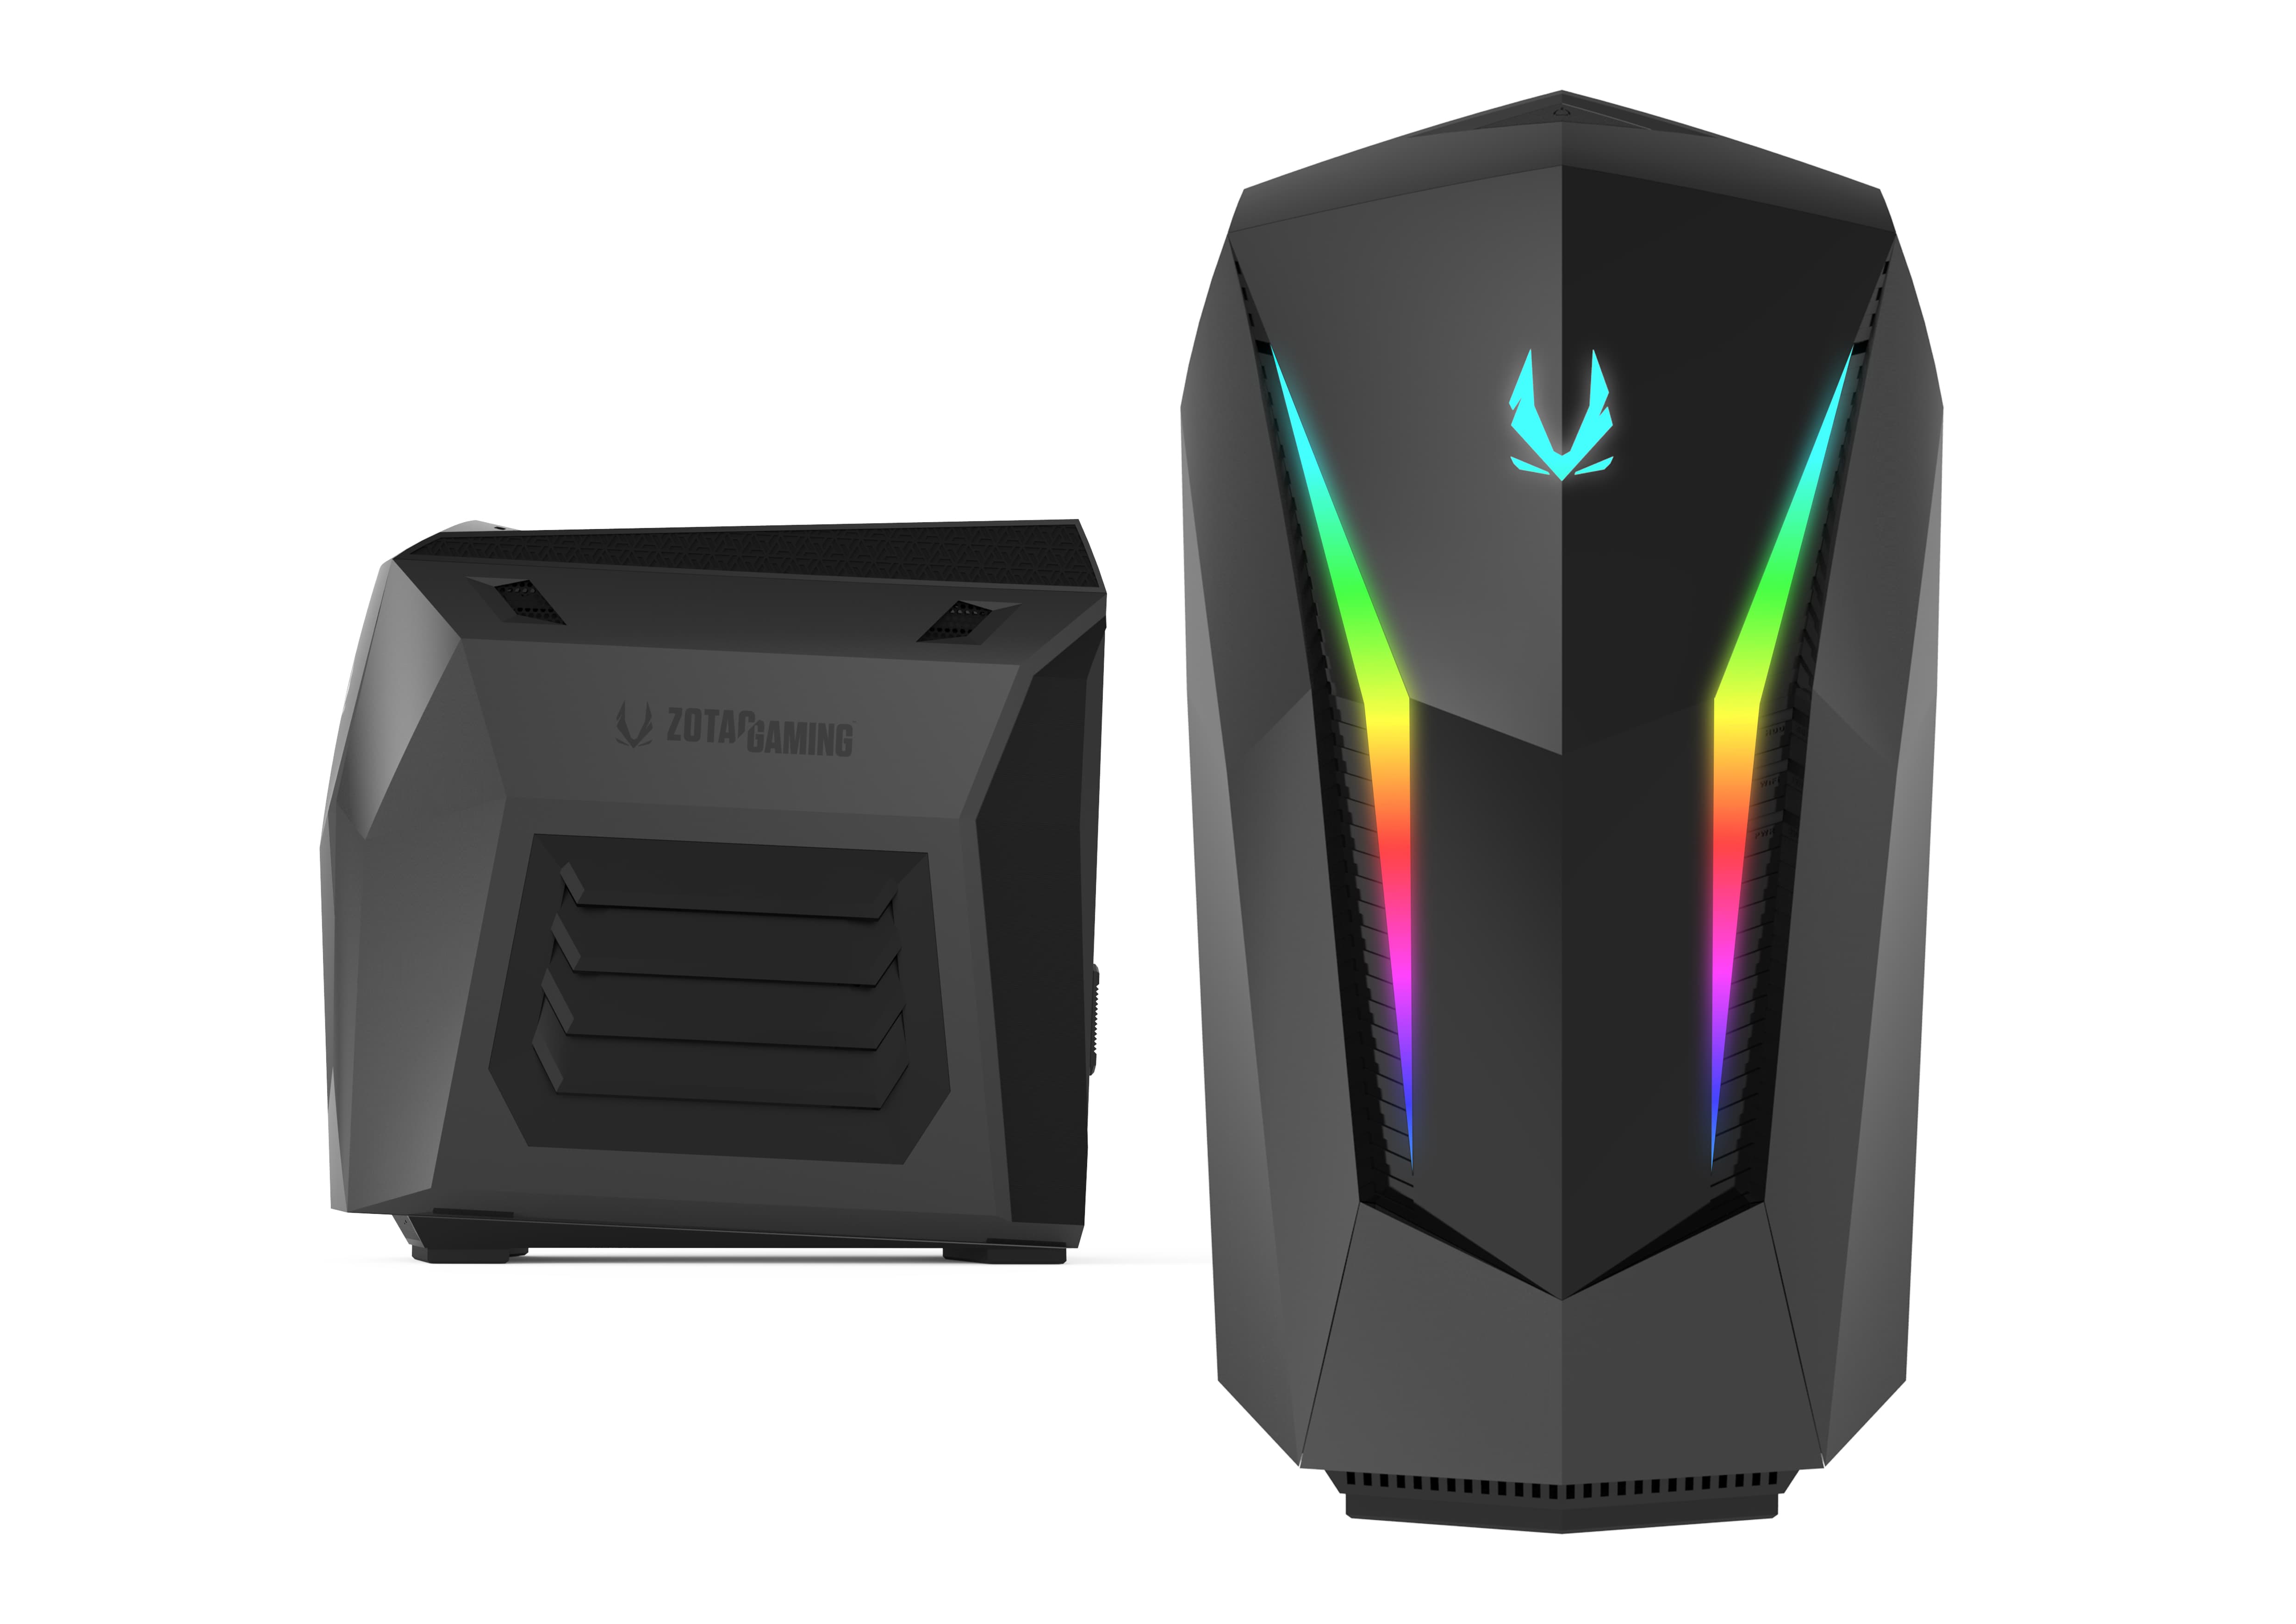 INTRODUCING THE SIZE BREAKING, SMALL AND STRONG MEK MINI GAMING PC